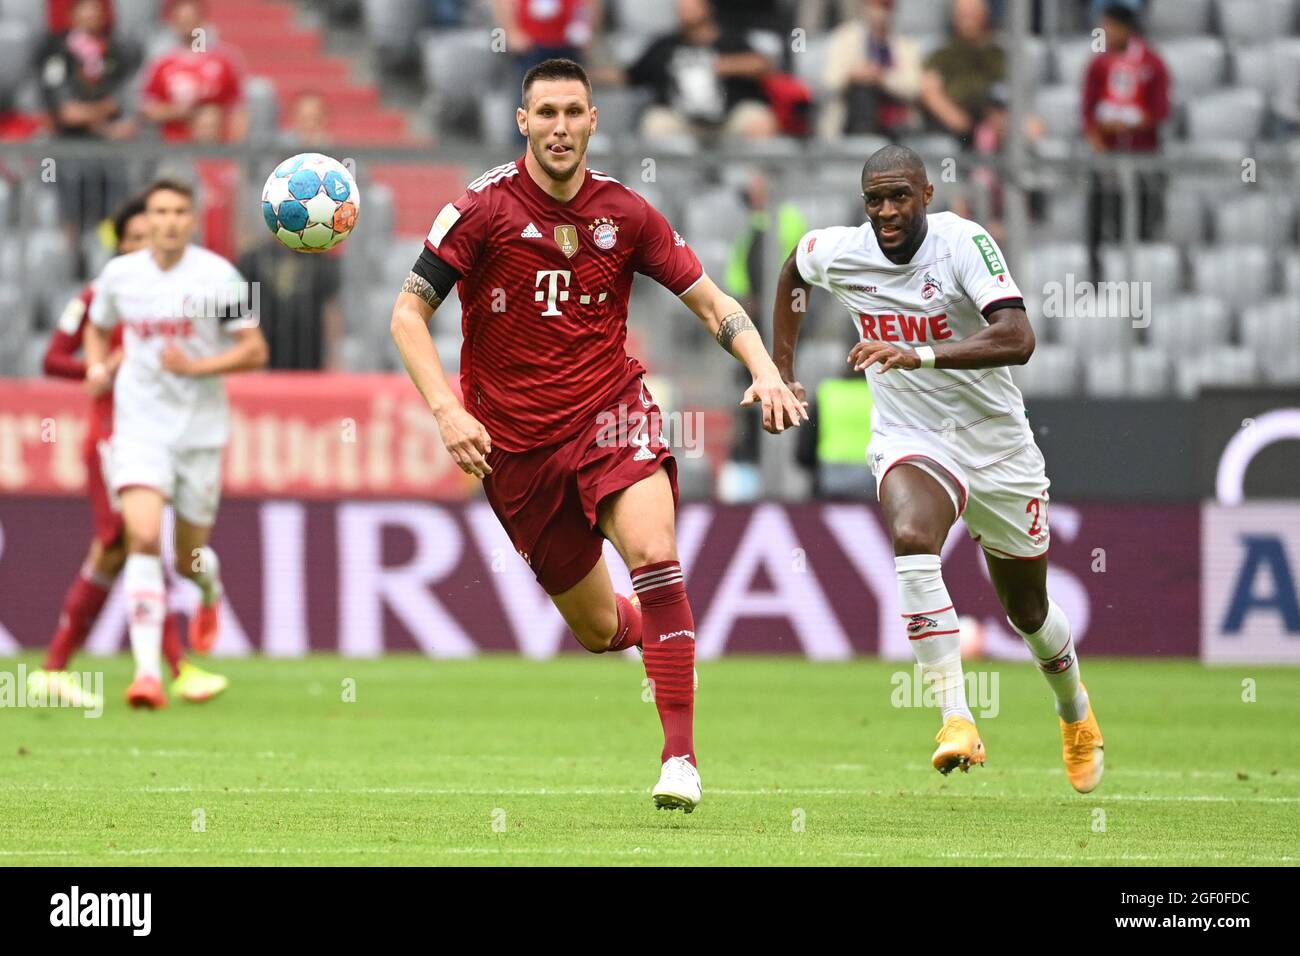 Munich, Germany. 22nd Aug, 2021. Football: Bundesliga, Bayern Munich - 1. FC  Köln, Matchday 2, Allianz Arena. Bayern's Niklas Süle (l) in action against  Anthony Modeste of Cologne. IMPORTANT NOTE: In accordance